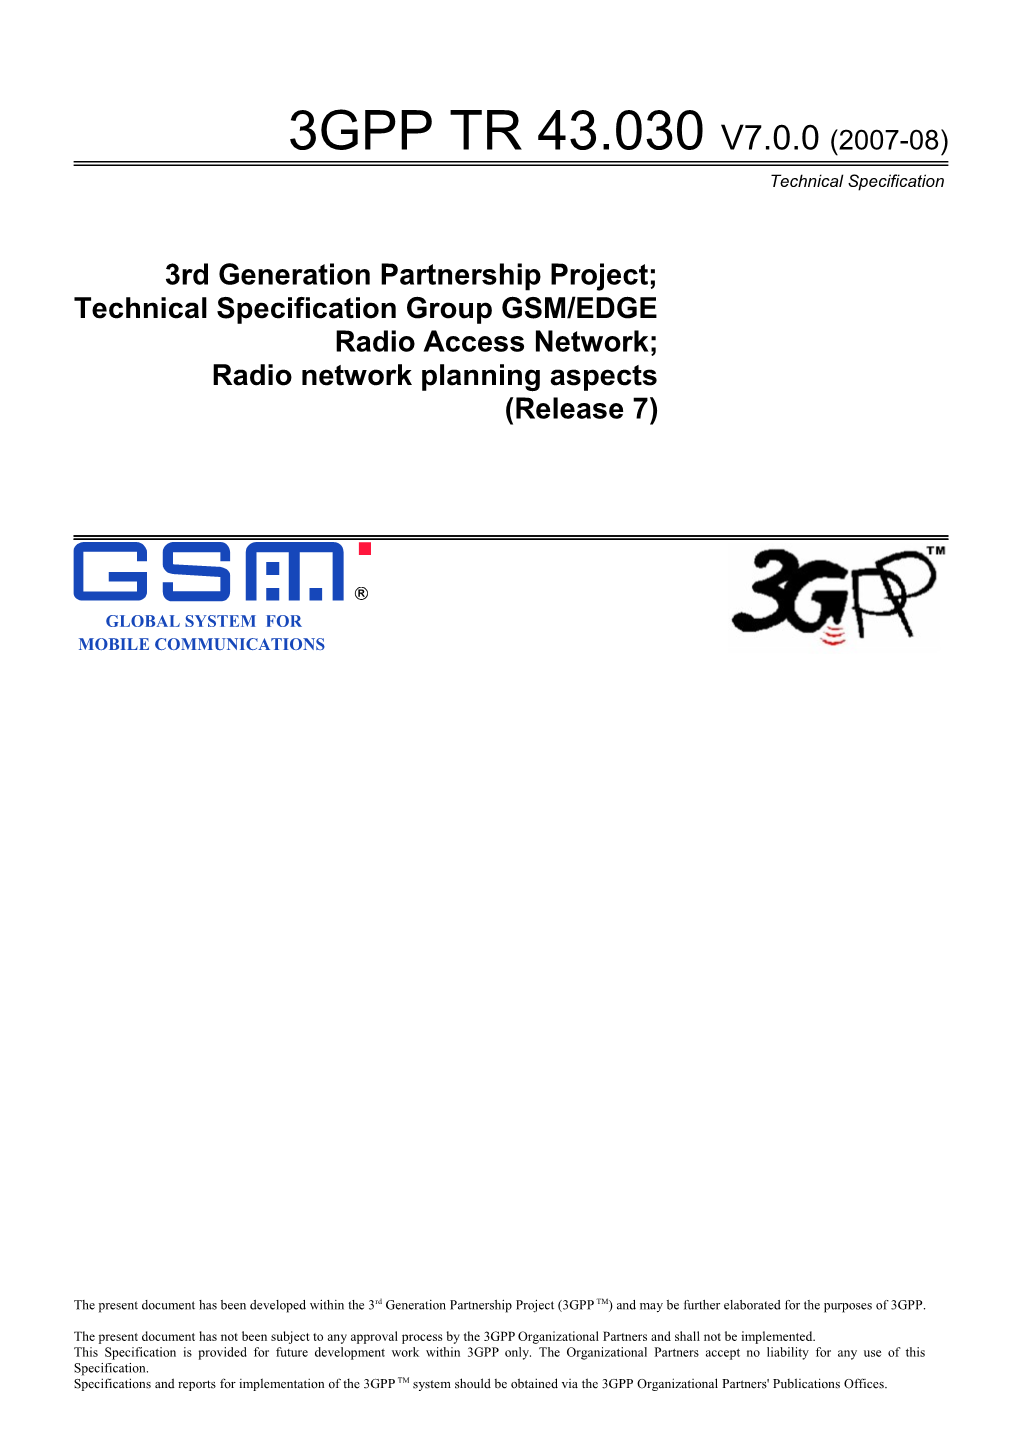 Technical Specification Group GSM/EDGE